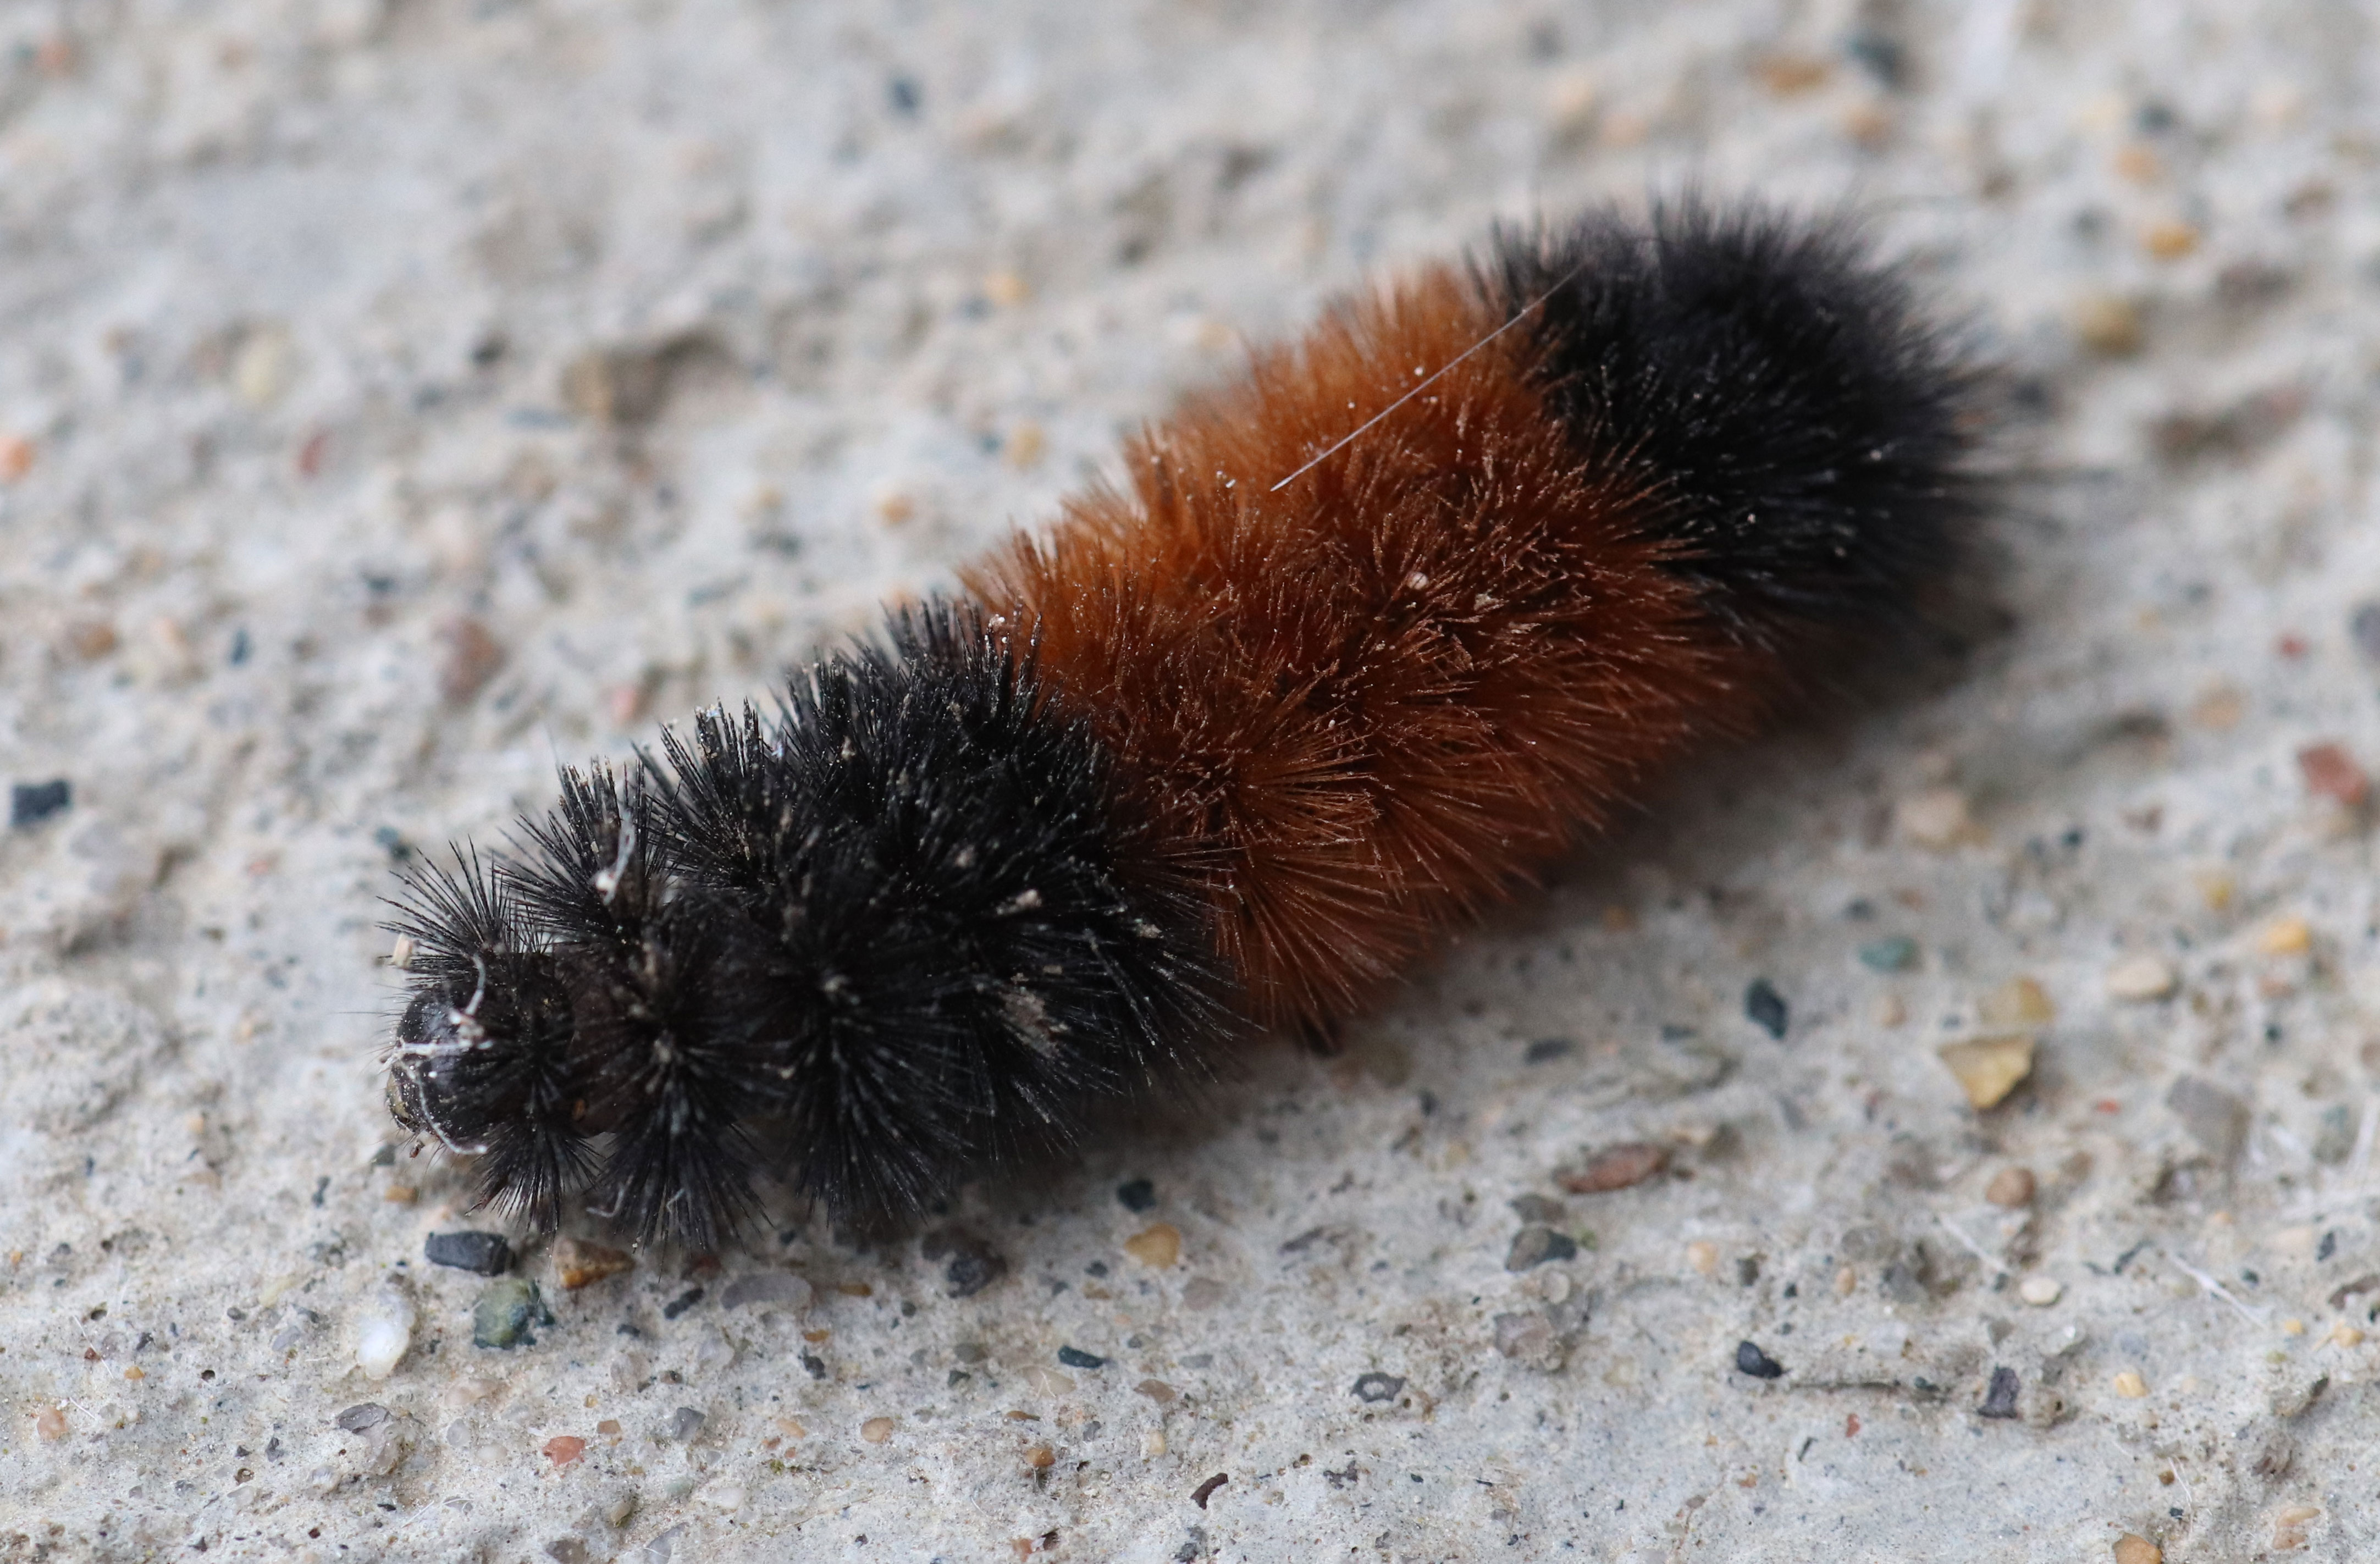 Black hairy caterpillar with a dark brown band in the middle of its body. The caterpillar is crawling on grey cement with visible pebbles present in the substrate.